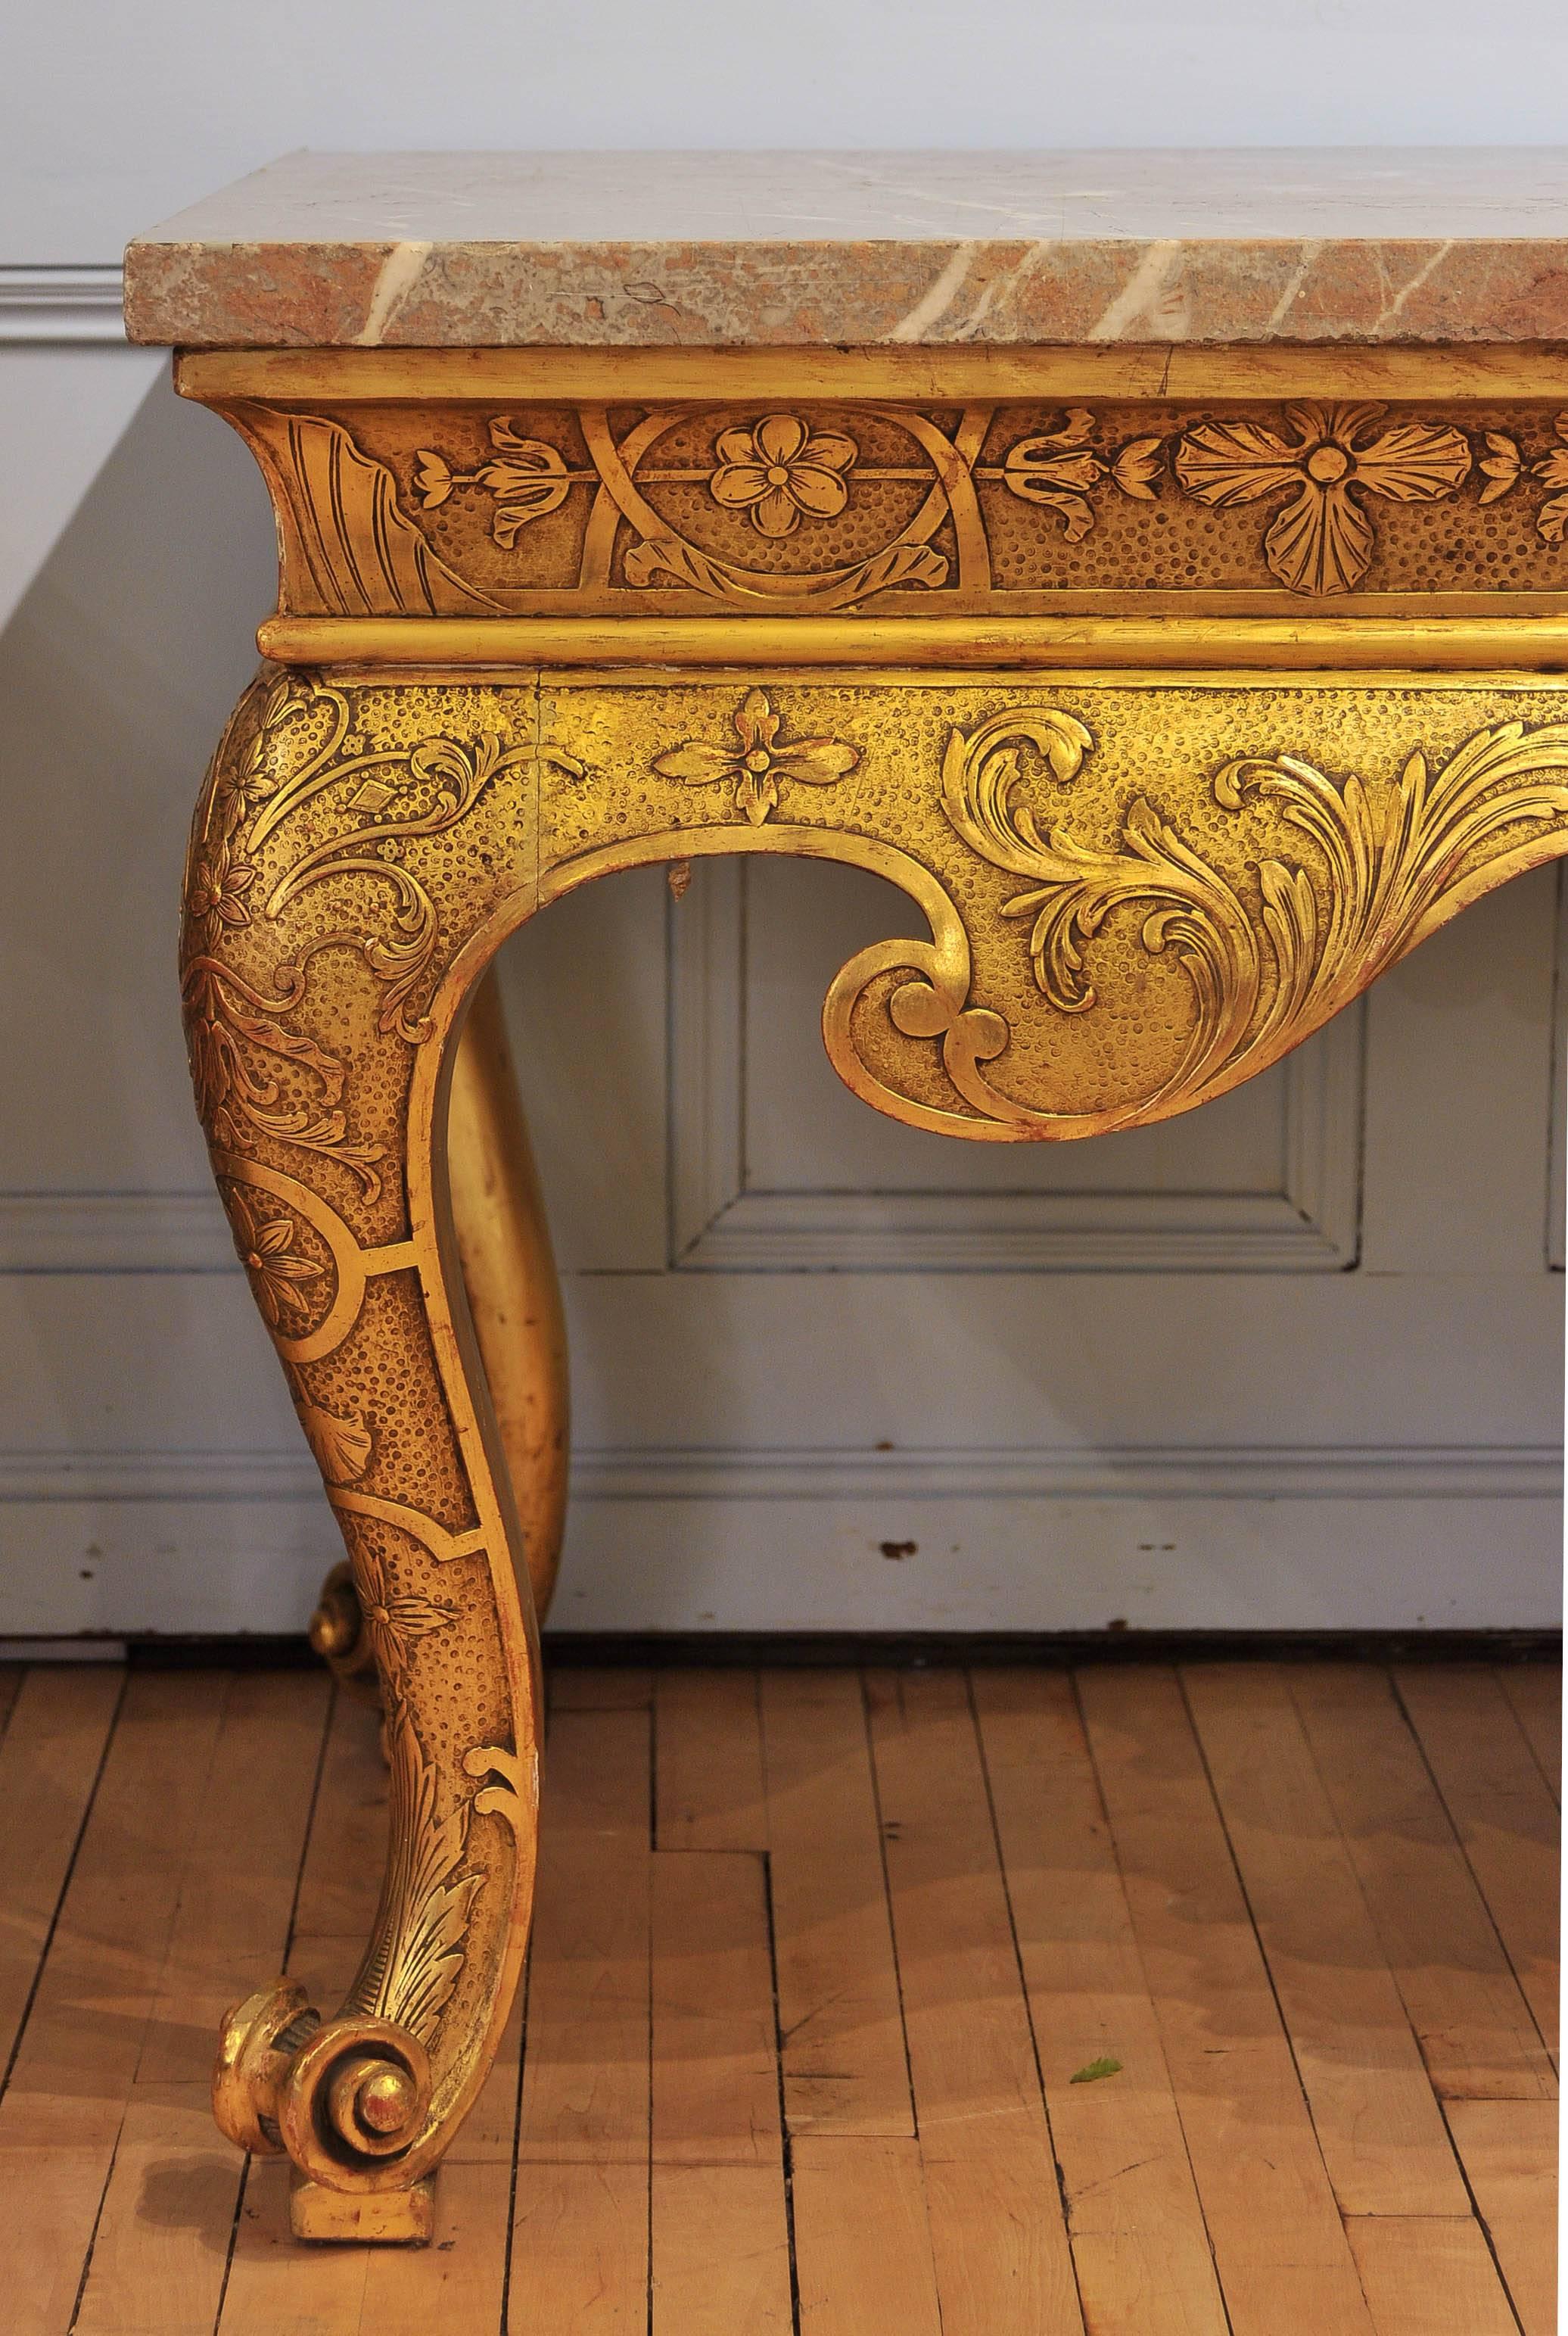 This magnificent and grandiose pair of 19th century gilt consoles feature substantial tops supported on bold and ornate cabriole legs with scroll feet. The marble measures 1 ½ in - 4 cm thick and the consoles have an all-over decorative floral and